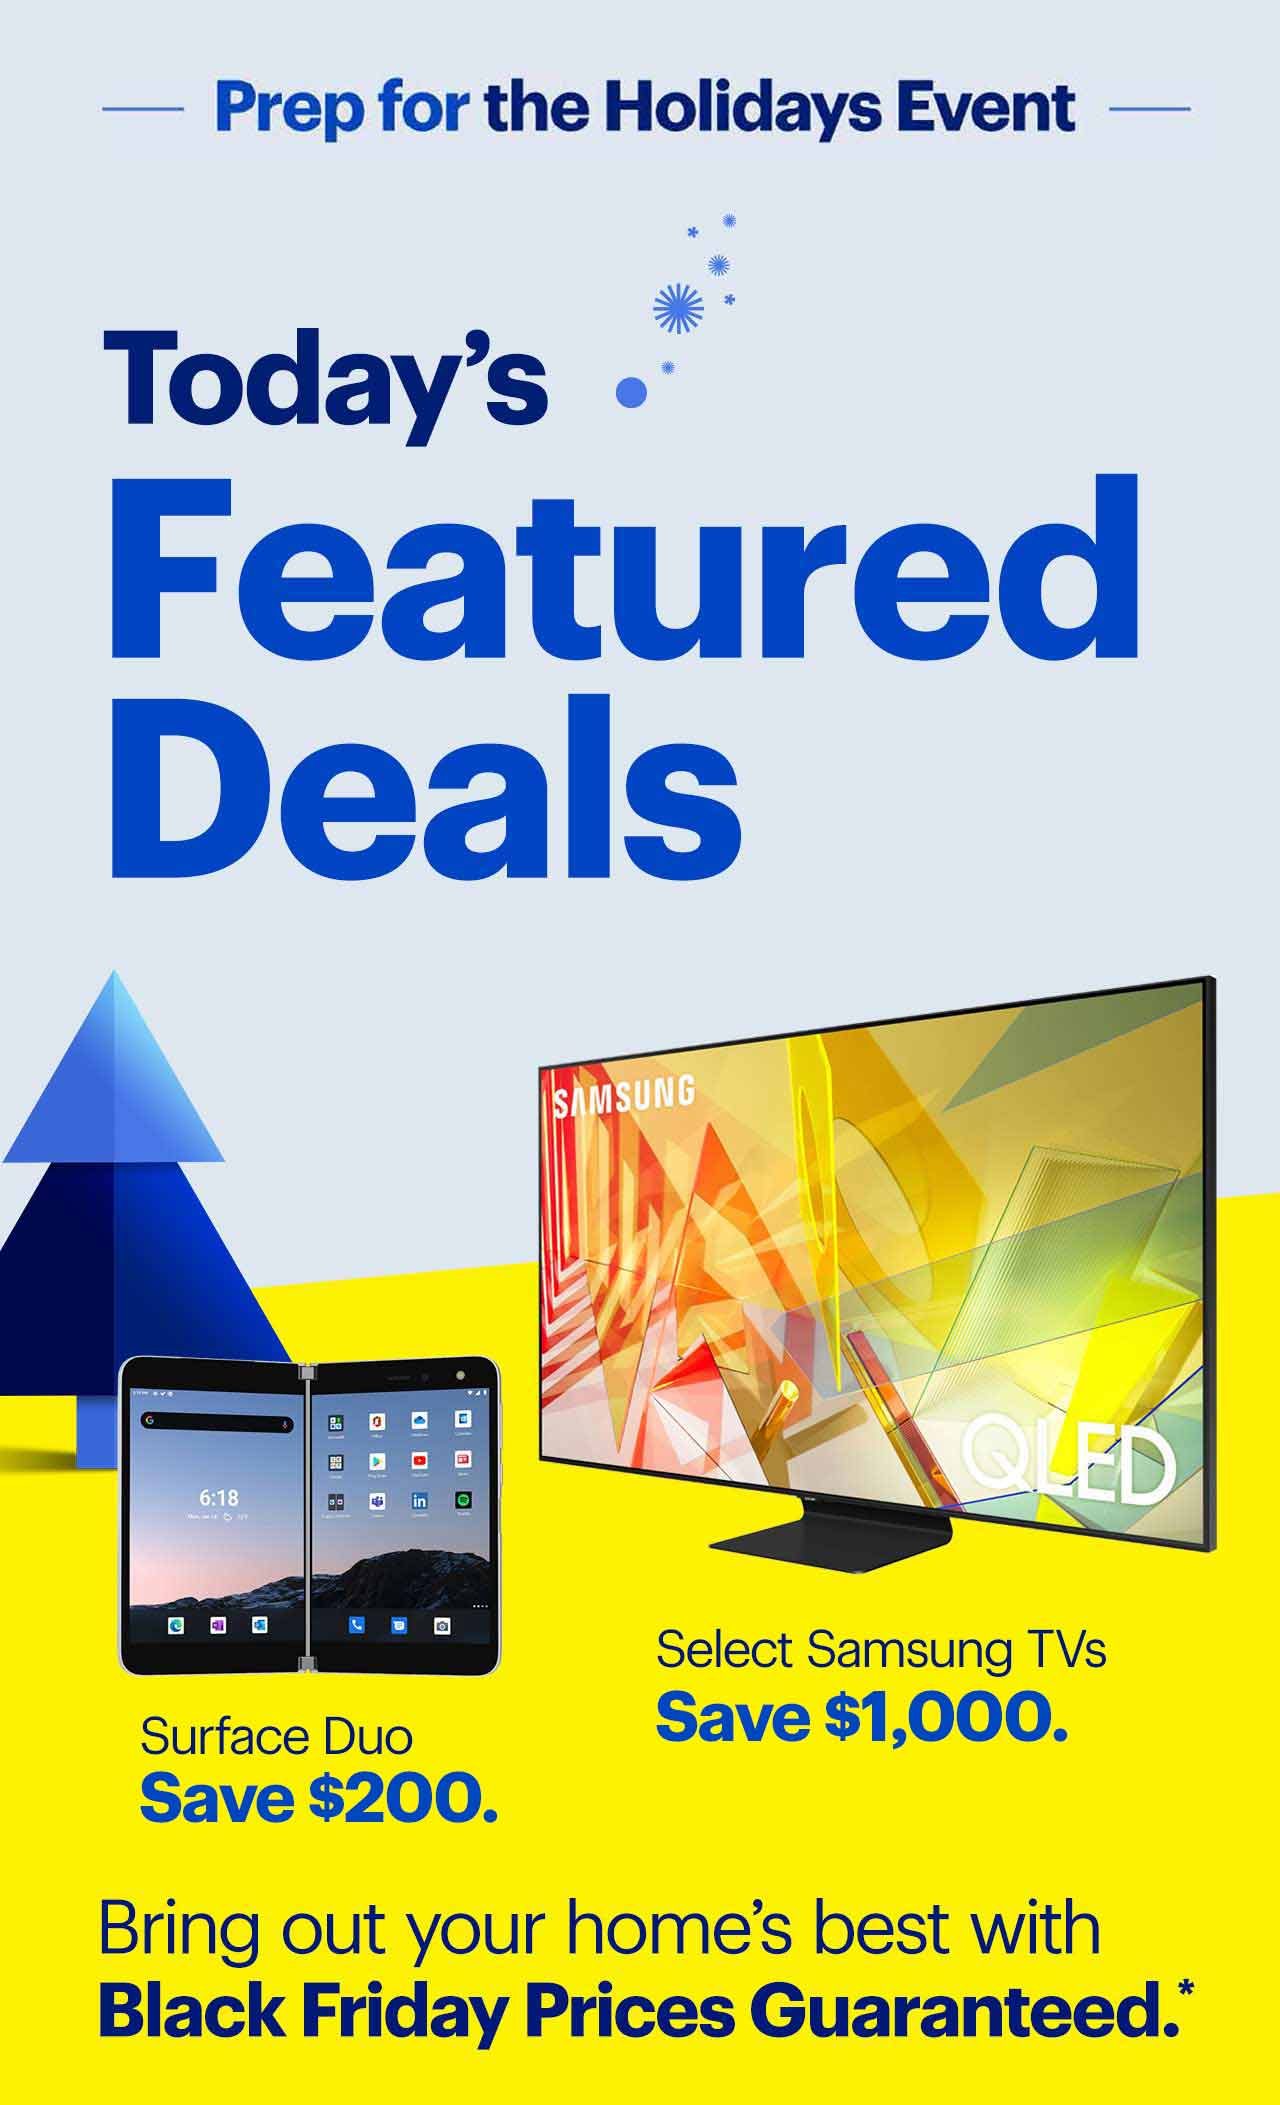 Prep for the holidays event. Today’s featured deals are: Save $1,000 on select Samsung TVs; and save $200 on Surface Duo. Bring out your home’s best with Black Friday Prices Guaranteed. Reference disclaimer.